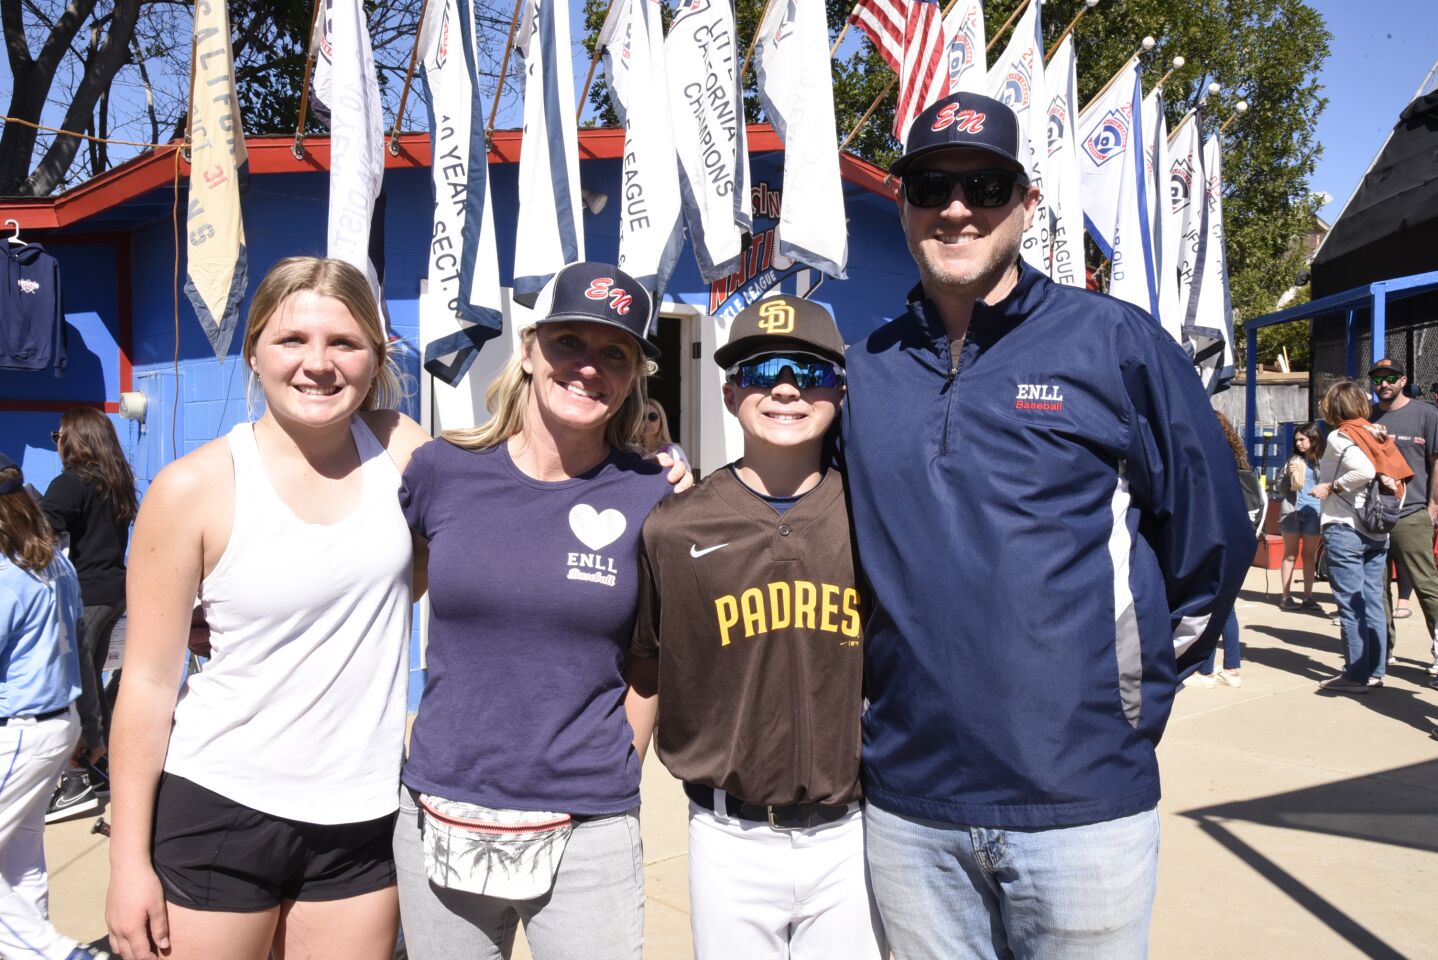 Encinitas National Little League President Andy Jasper (right) with daughter Lily, wife Courtney Jasper and son Drew